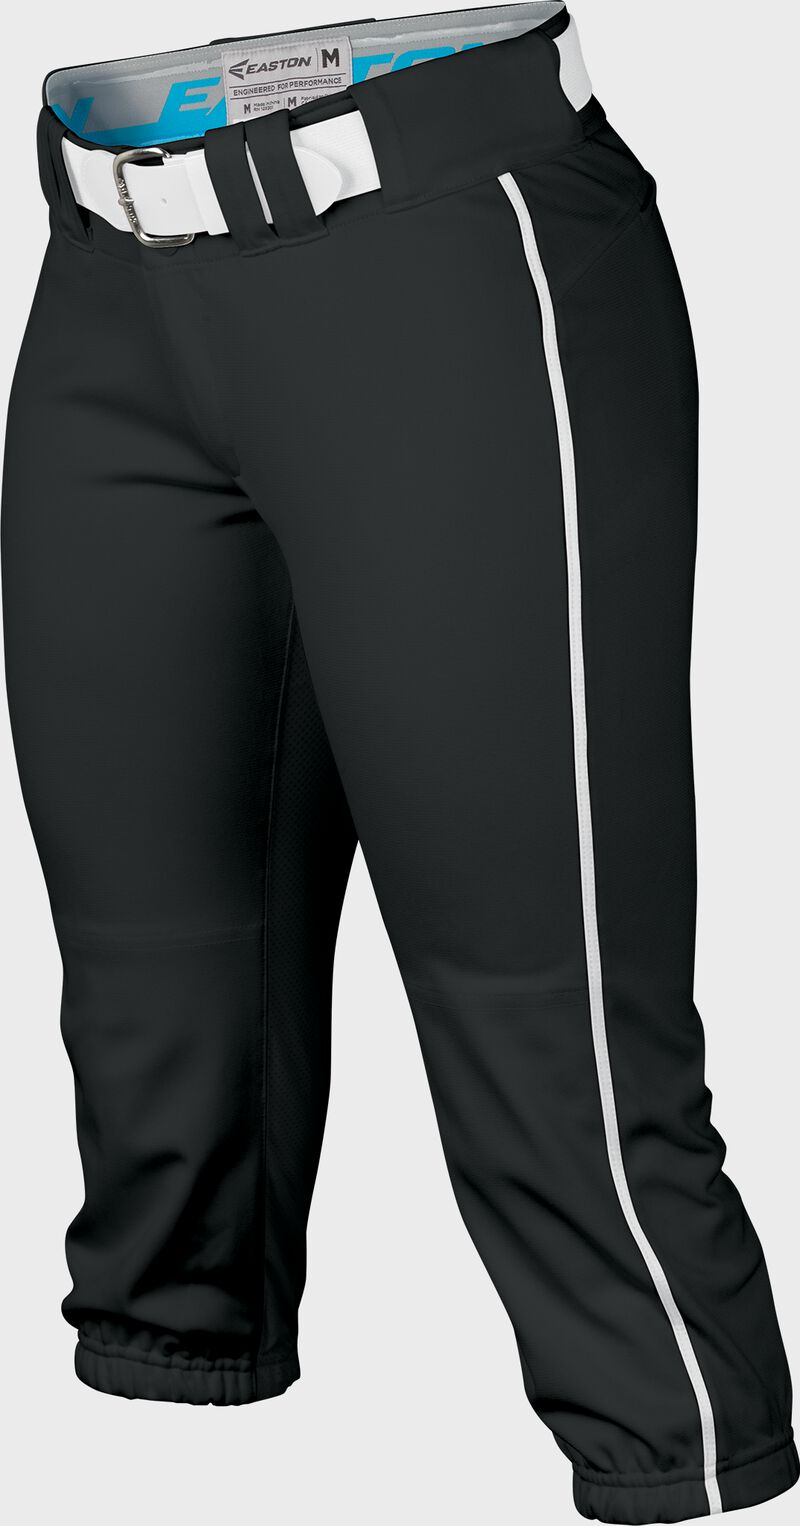 Easton Prowess Softball Pant Women's Piped BLACK/WHITE  L